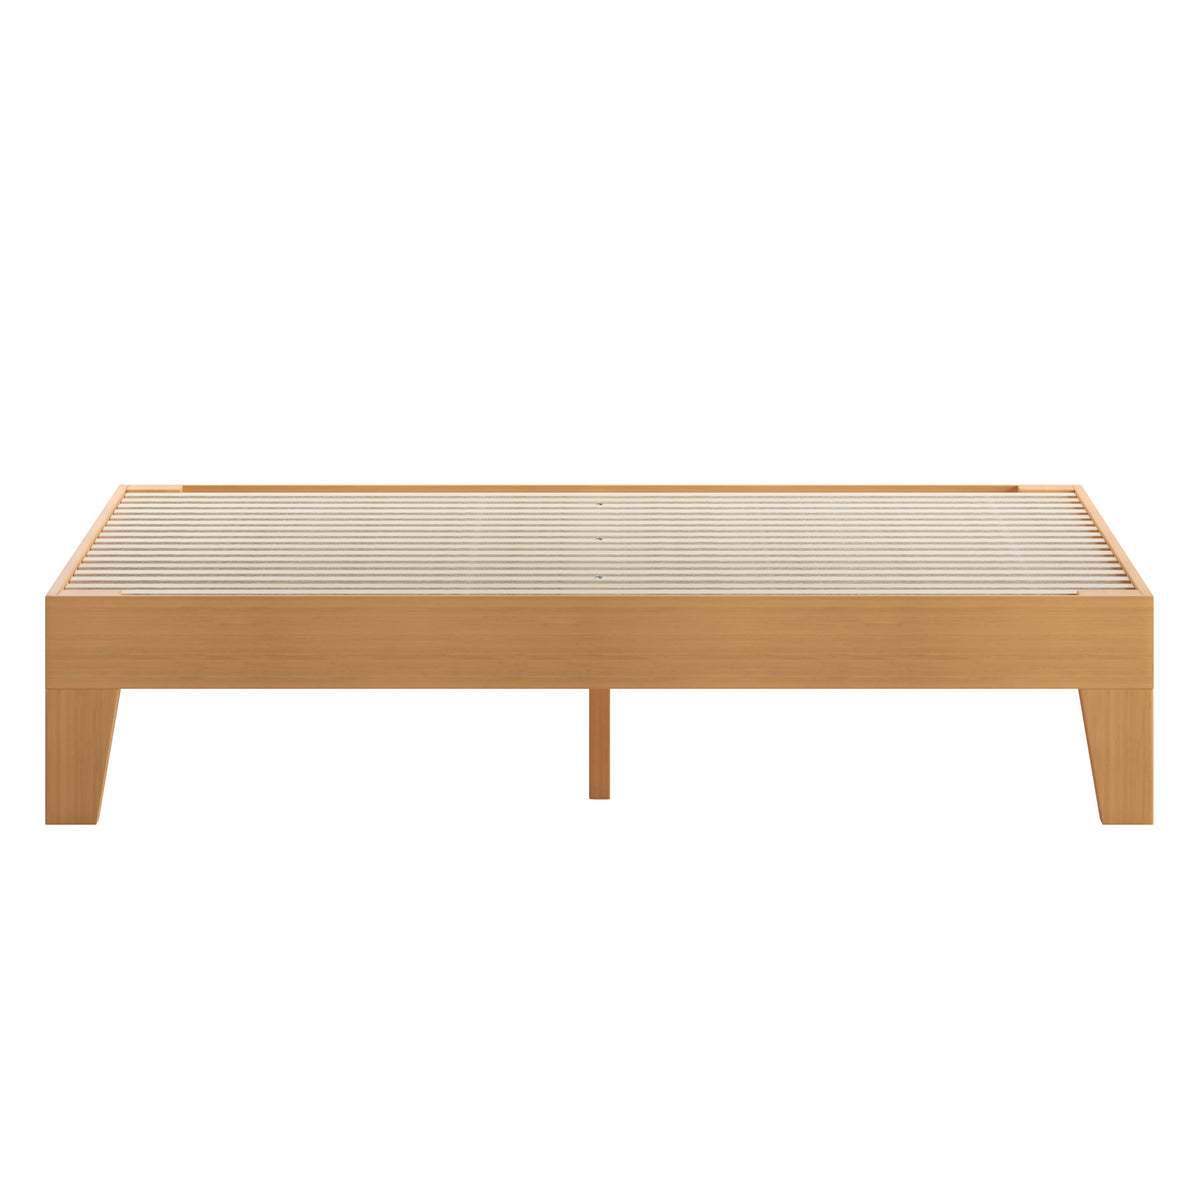 Natural,Queen |#| Wood Platform Bed with 14 Wooden Support Slats in Natural Pine - Queen